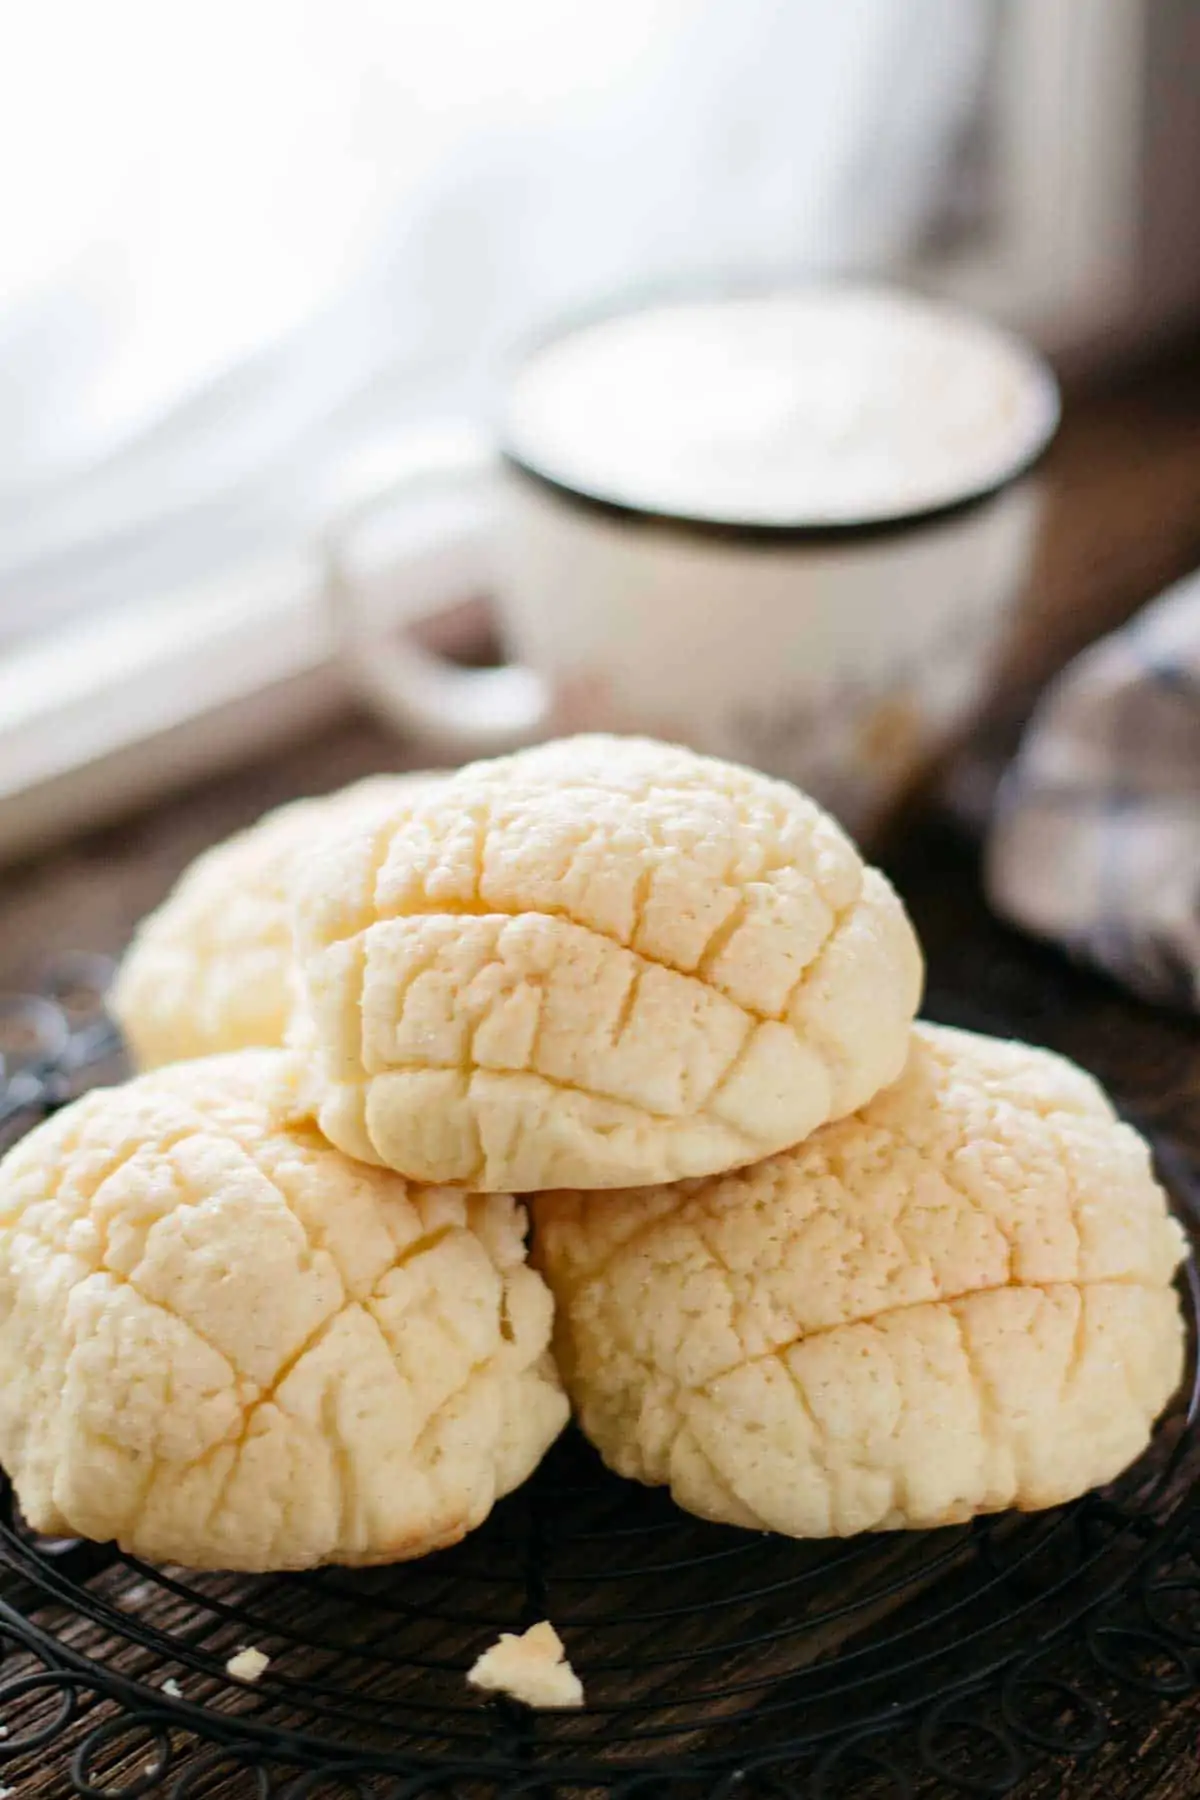 4 melon pan with a cup of coffee